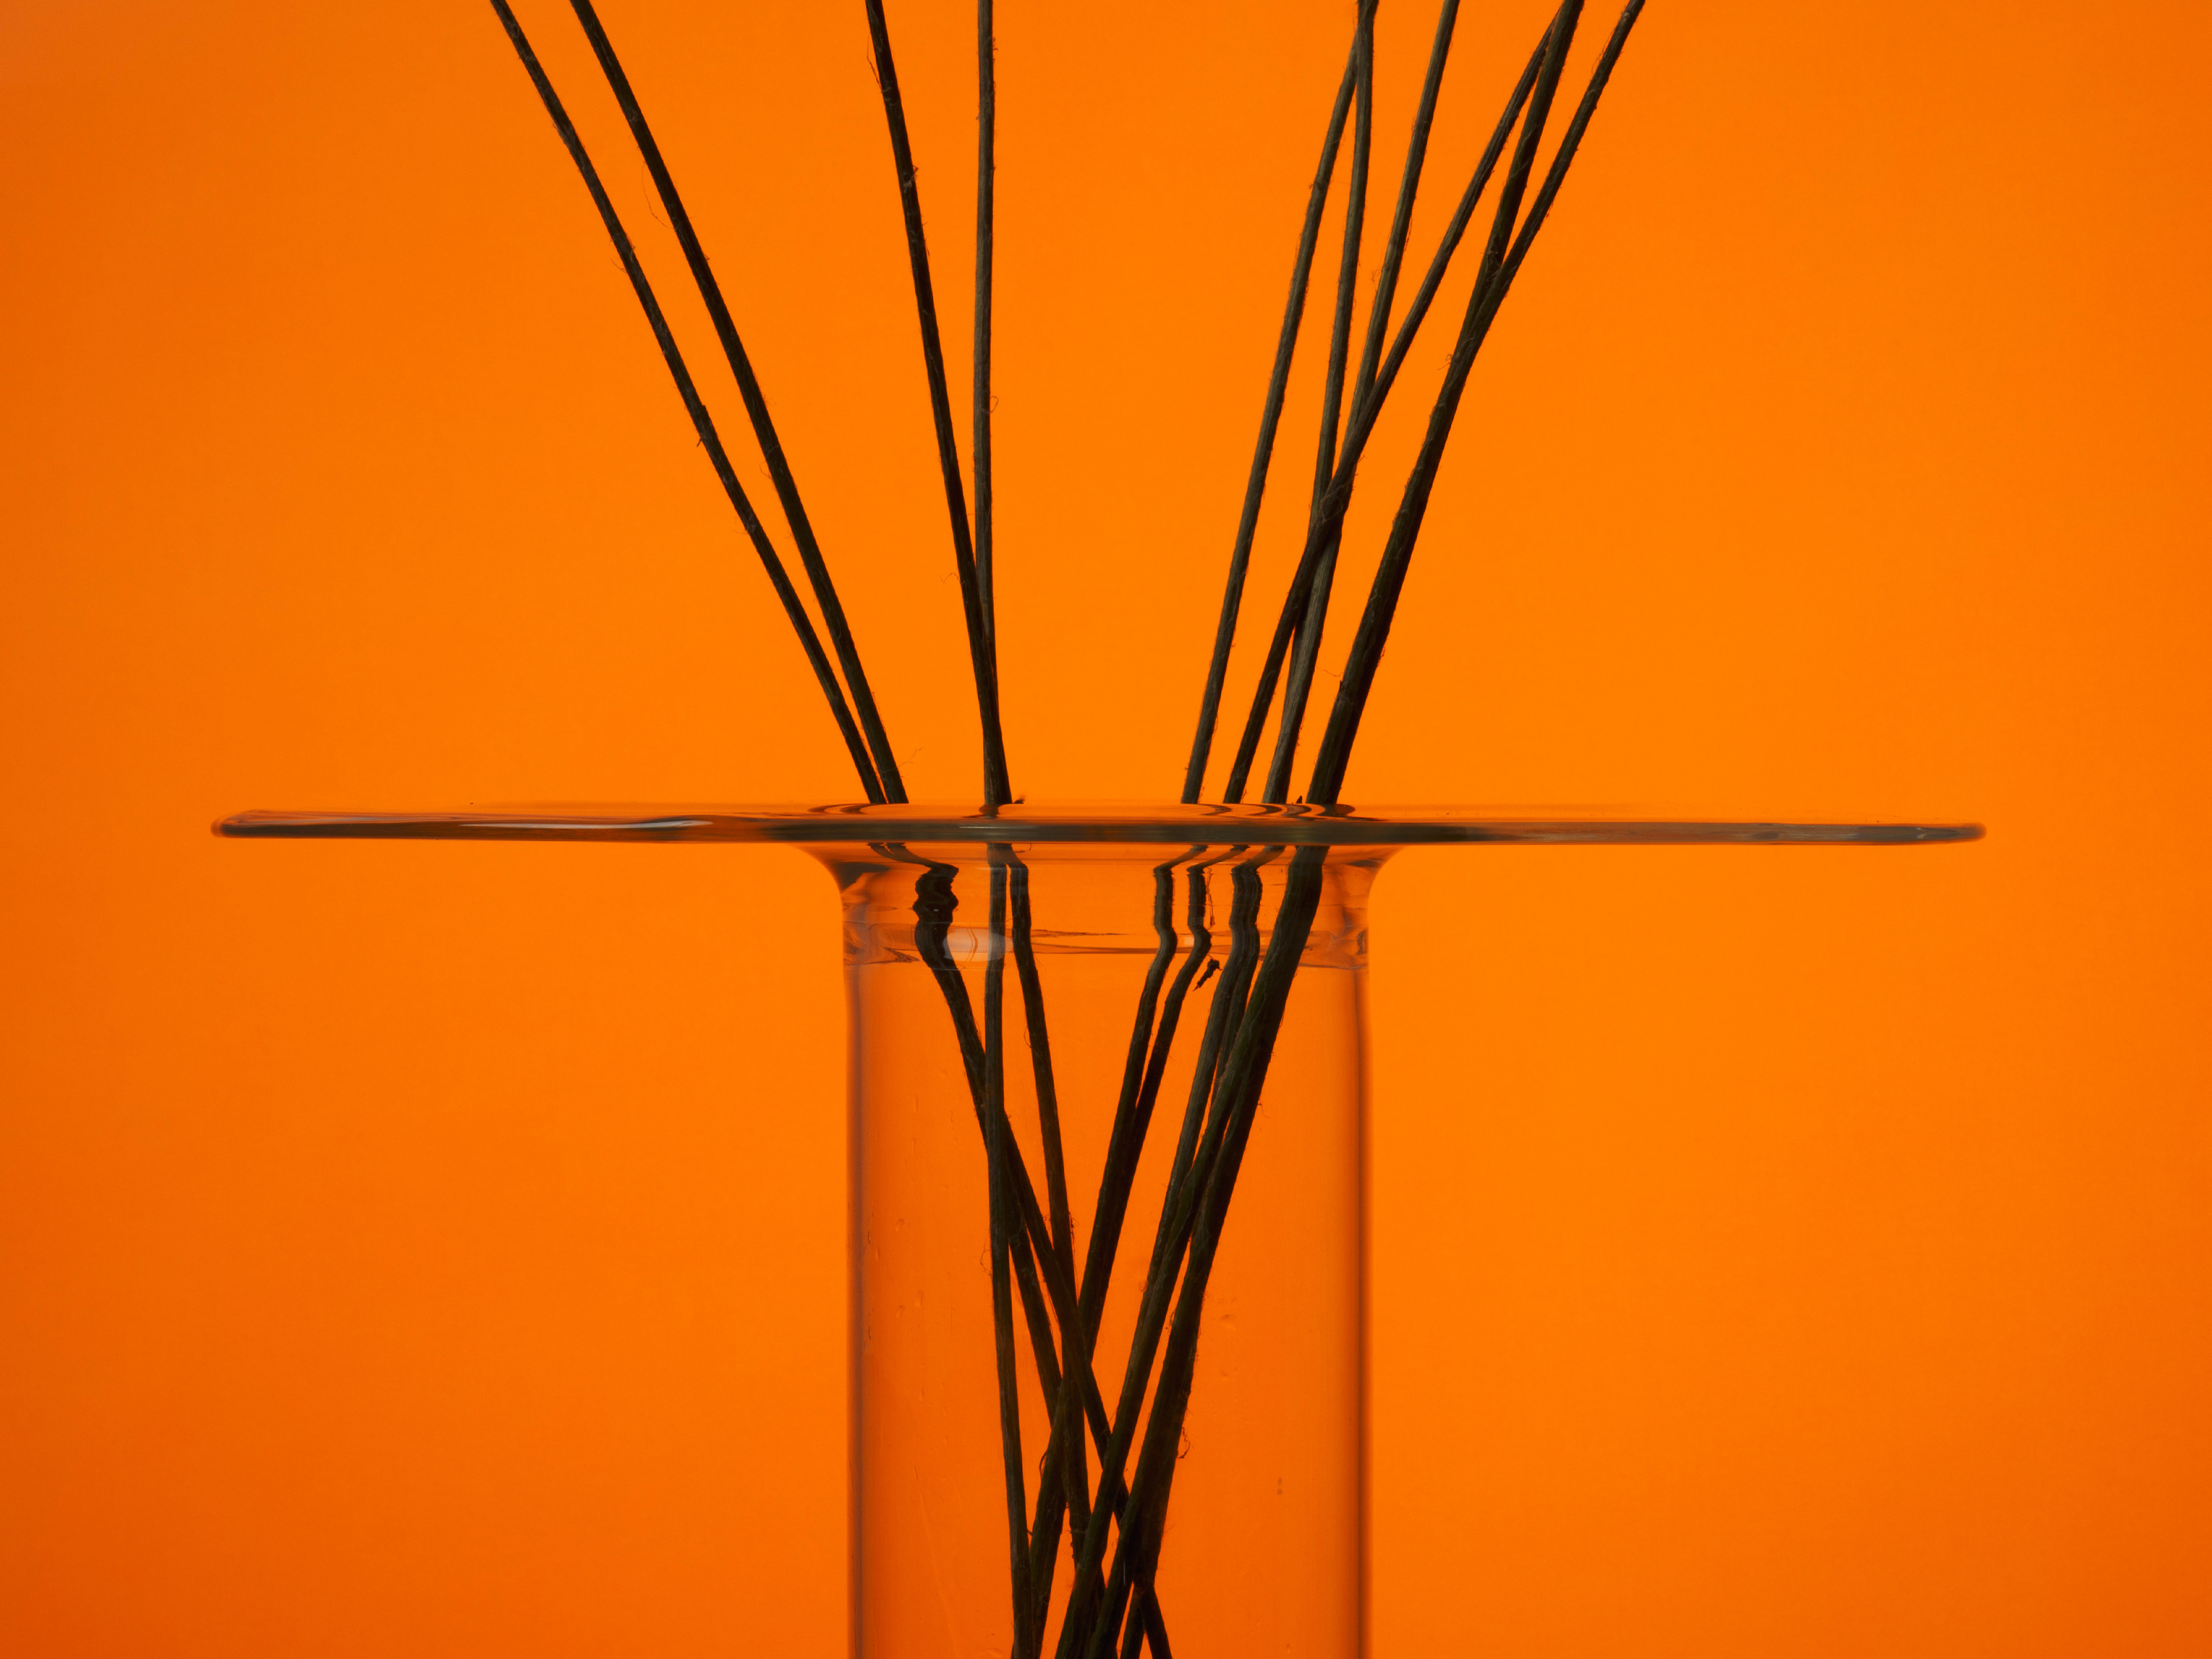 Detail of a glass vase with flowers inside on an orange background